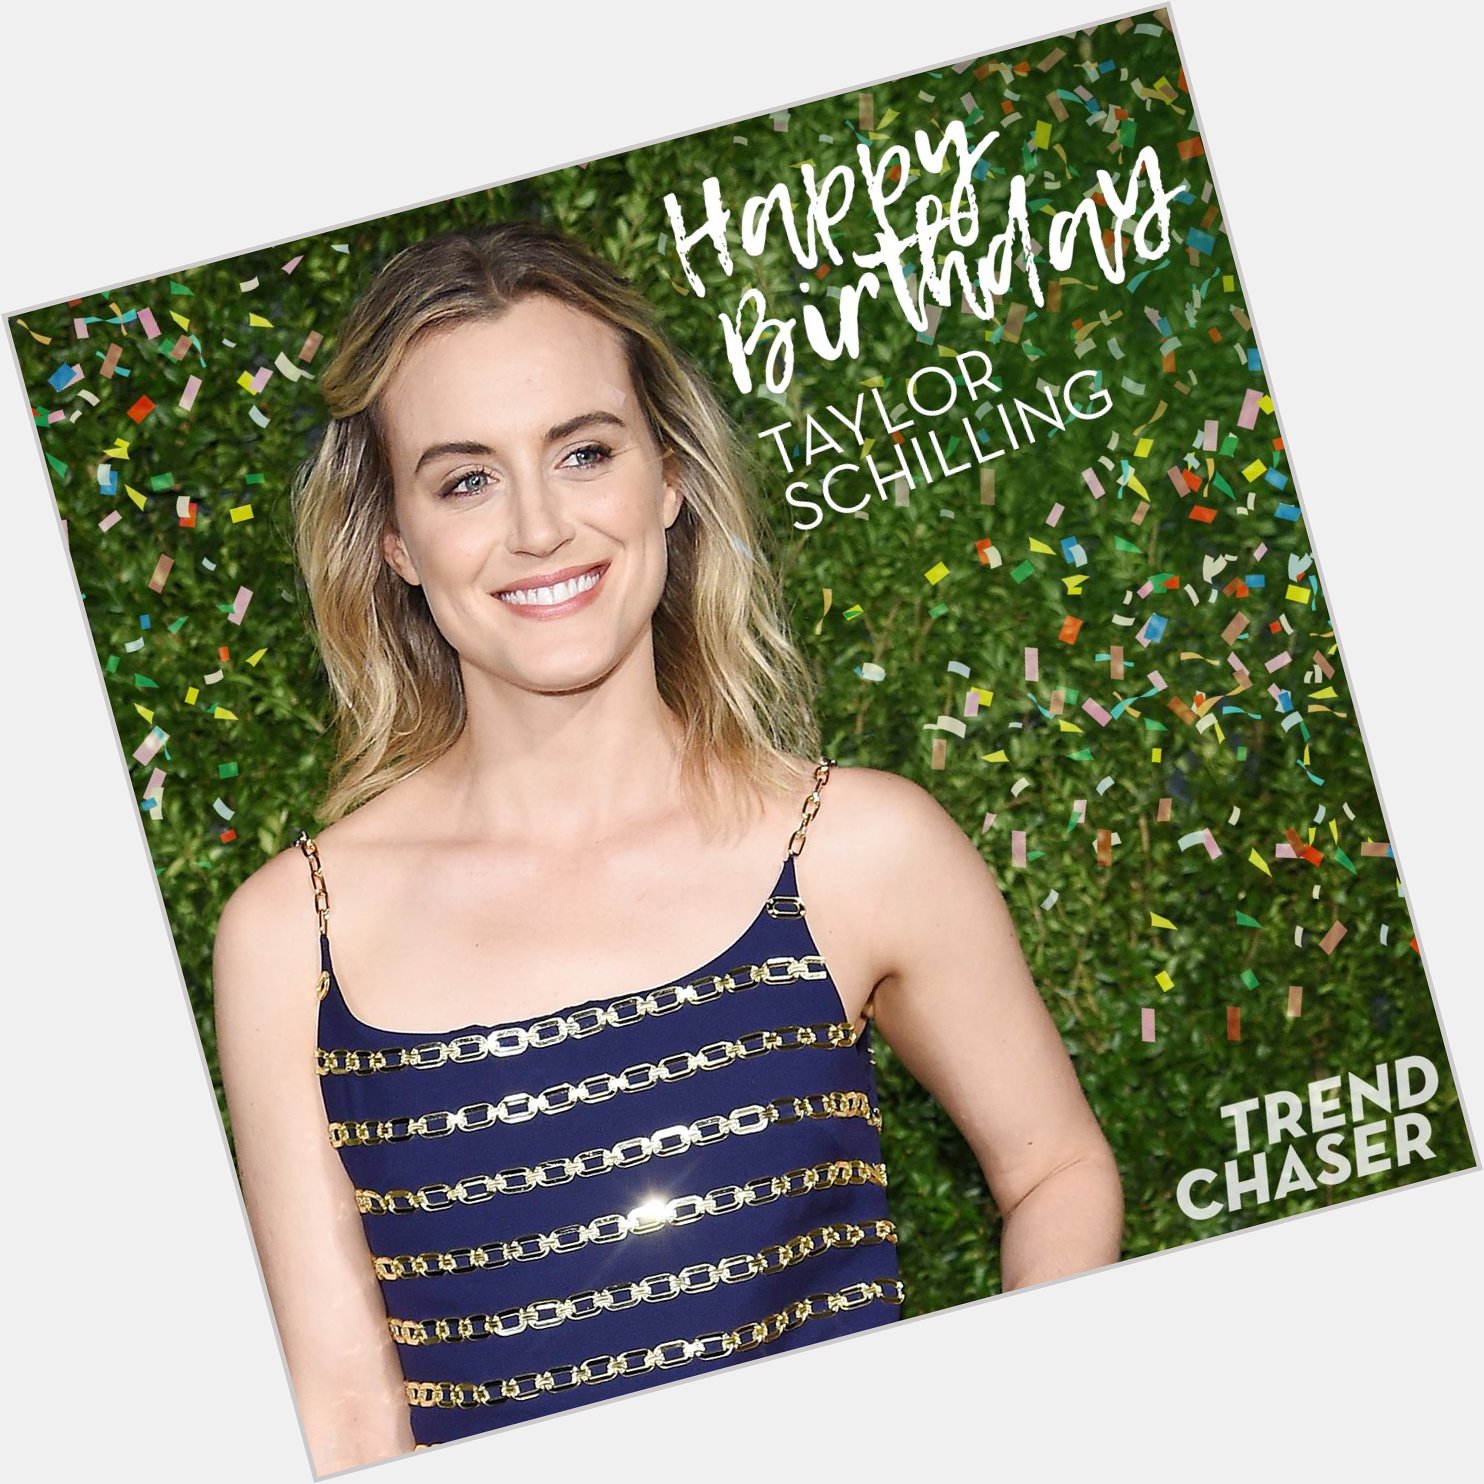 Happy birthday Taylor Schilling! 33 is the new 32! :) 